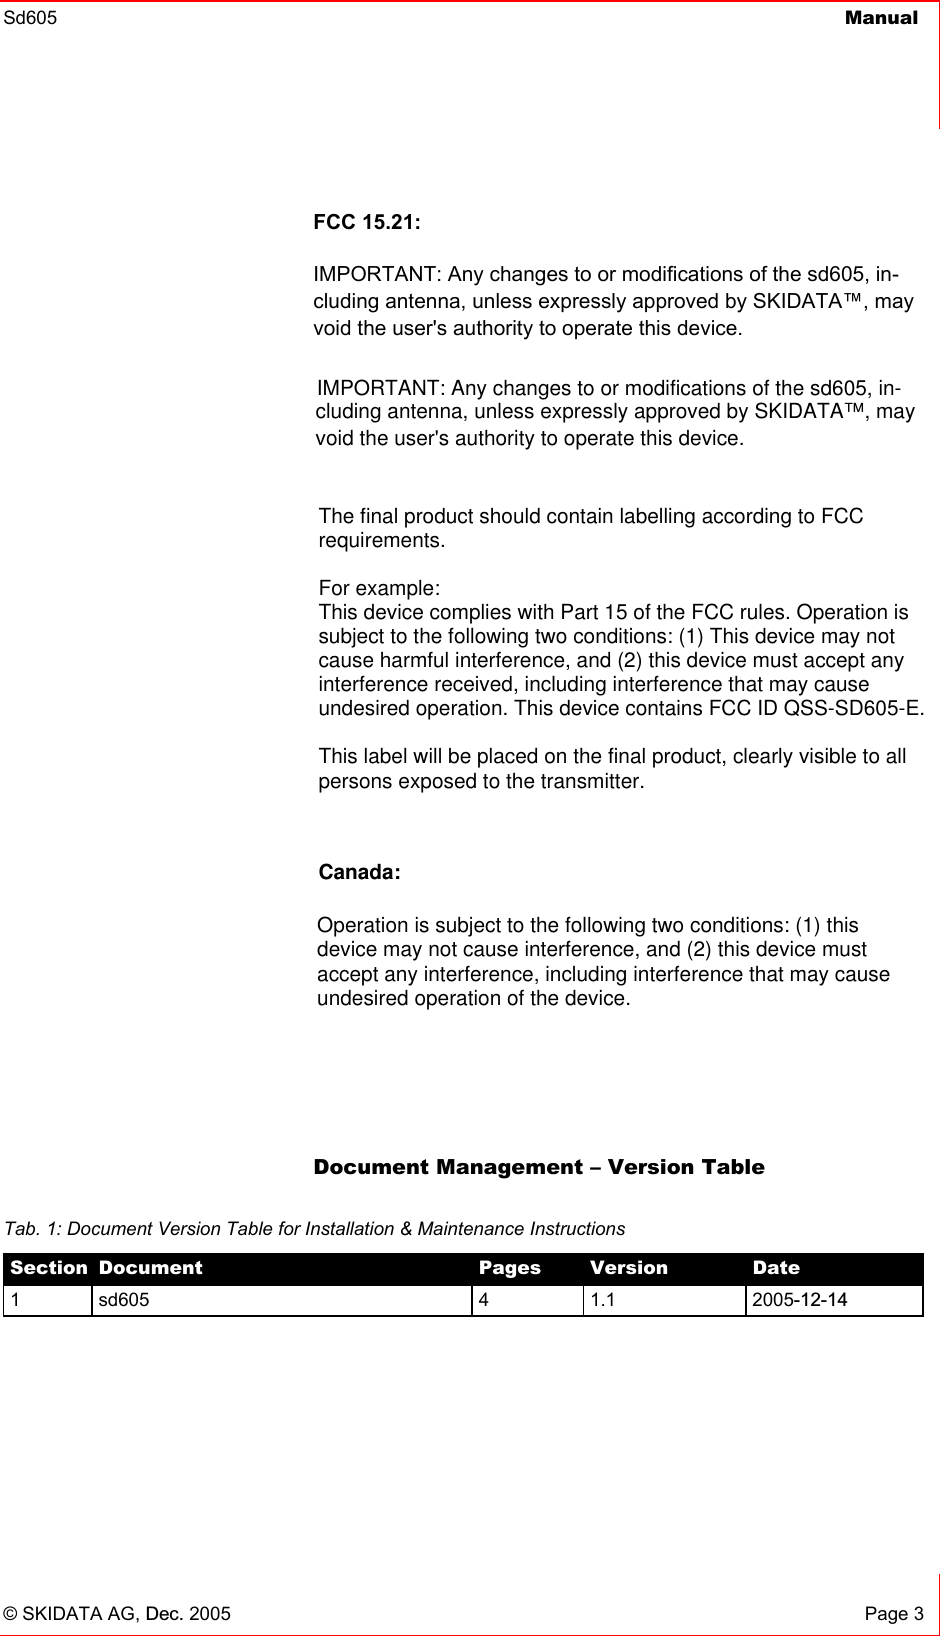 Sd605  Manual    © SKIDATA AG, Dec. 2005 Page 3 FCC 15.21: IMPORTANT: Any changes to or modifications of the sd605, in-cluding antenna, unless expressly approved by SKIDATA™, may void the user&apos;s authority to operate this device.            Document Management – Version Table  Tab. 1: Document Version Table for Installation &amp; Maintenance Instructions Section  Document  Pages  Version  Date 1 sd605 4 1.1 2005-12-14 IMPORTANT: Any changes to or modifications of the sd605, in-cluding antenna, unless expressly approved by SKIDATA™, may void the user&apos;s authority to operate this device. The final product should contain labelling according to FCCrequirements.For example:This device complies with Part 15 of the FCC rules. Operation issubject to the following two conditions: (1) This device may notcause harmful interference, and (2) this device must accept anyinterference received, including interference that may causeundesired operation. This device contains FCC ID QSS-SD605-E.This label will be placed on the final product, clearly visible to allpersons exposed to the transmitter.Operation is subject to the following two conditions: (1) thisdevice may not cause interference, and (2) this device mustaccept any interference, including interference that may causeundesired operation of the device.Canada: